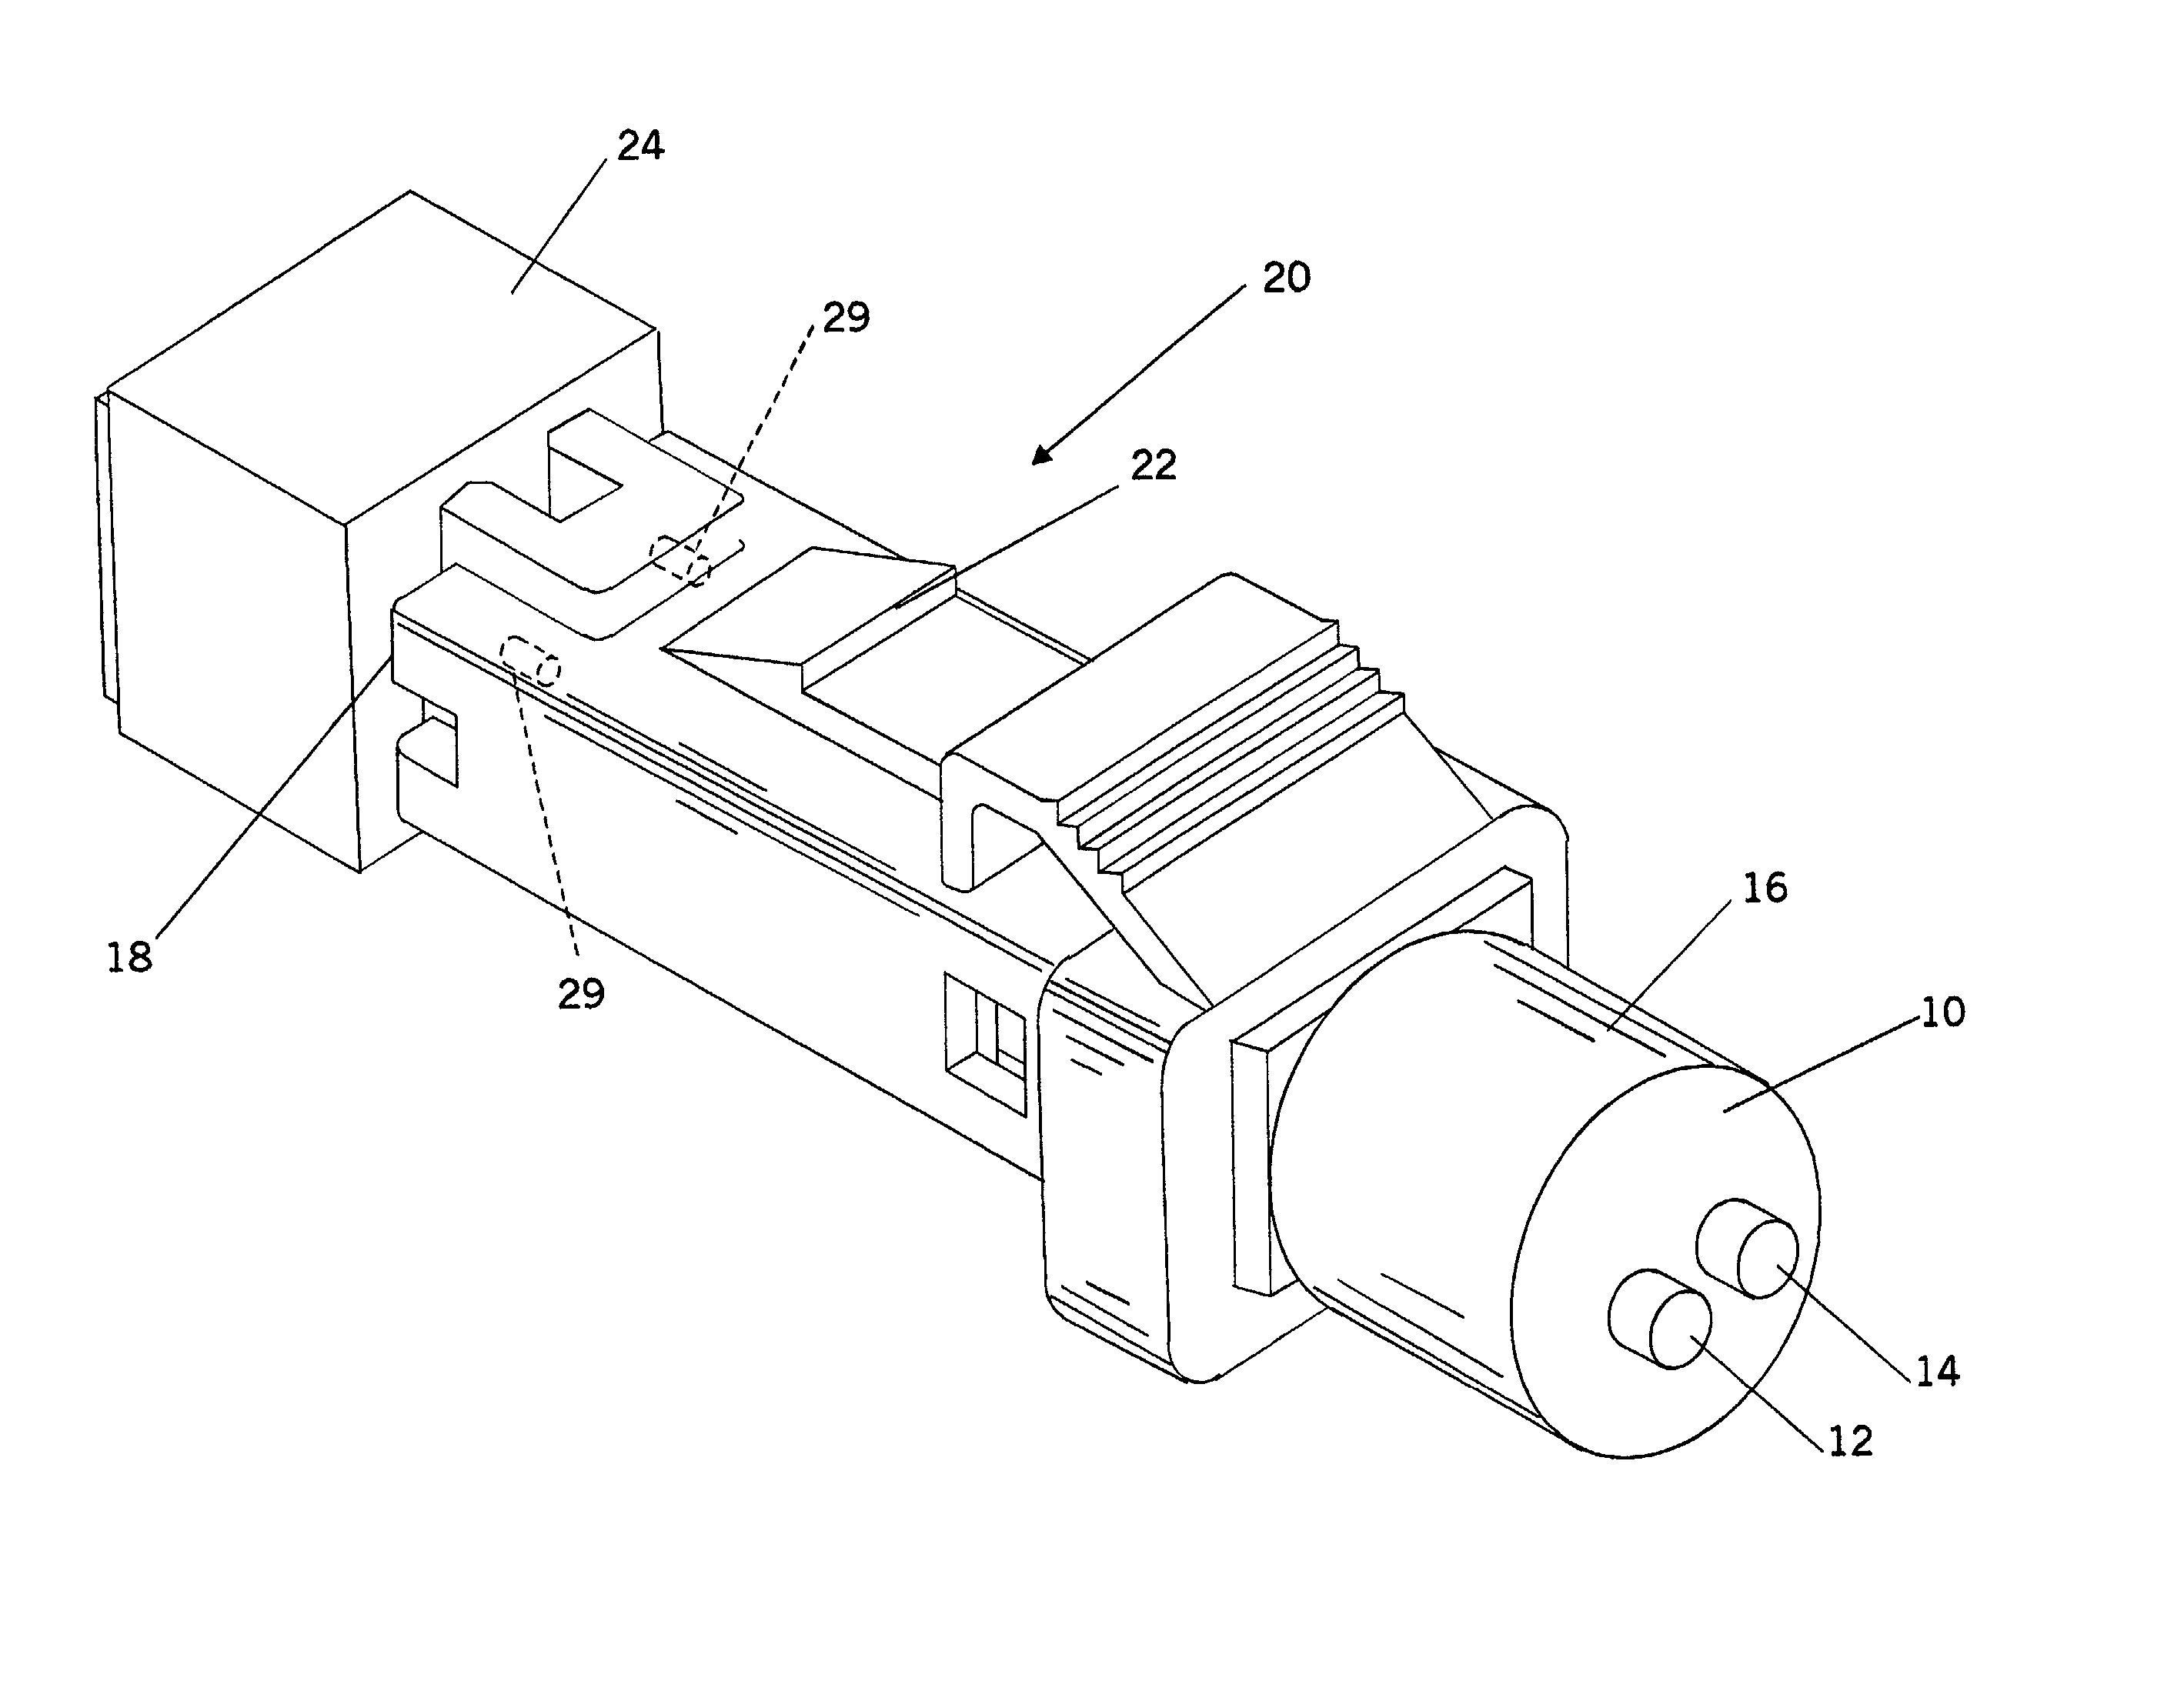 Optical subassembly for optical communications